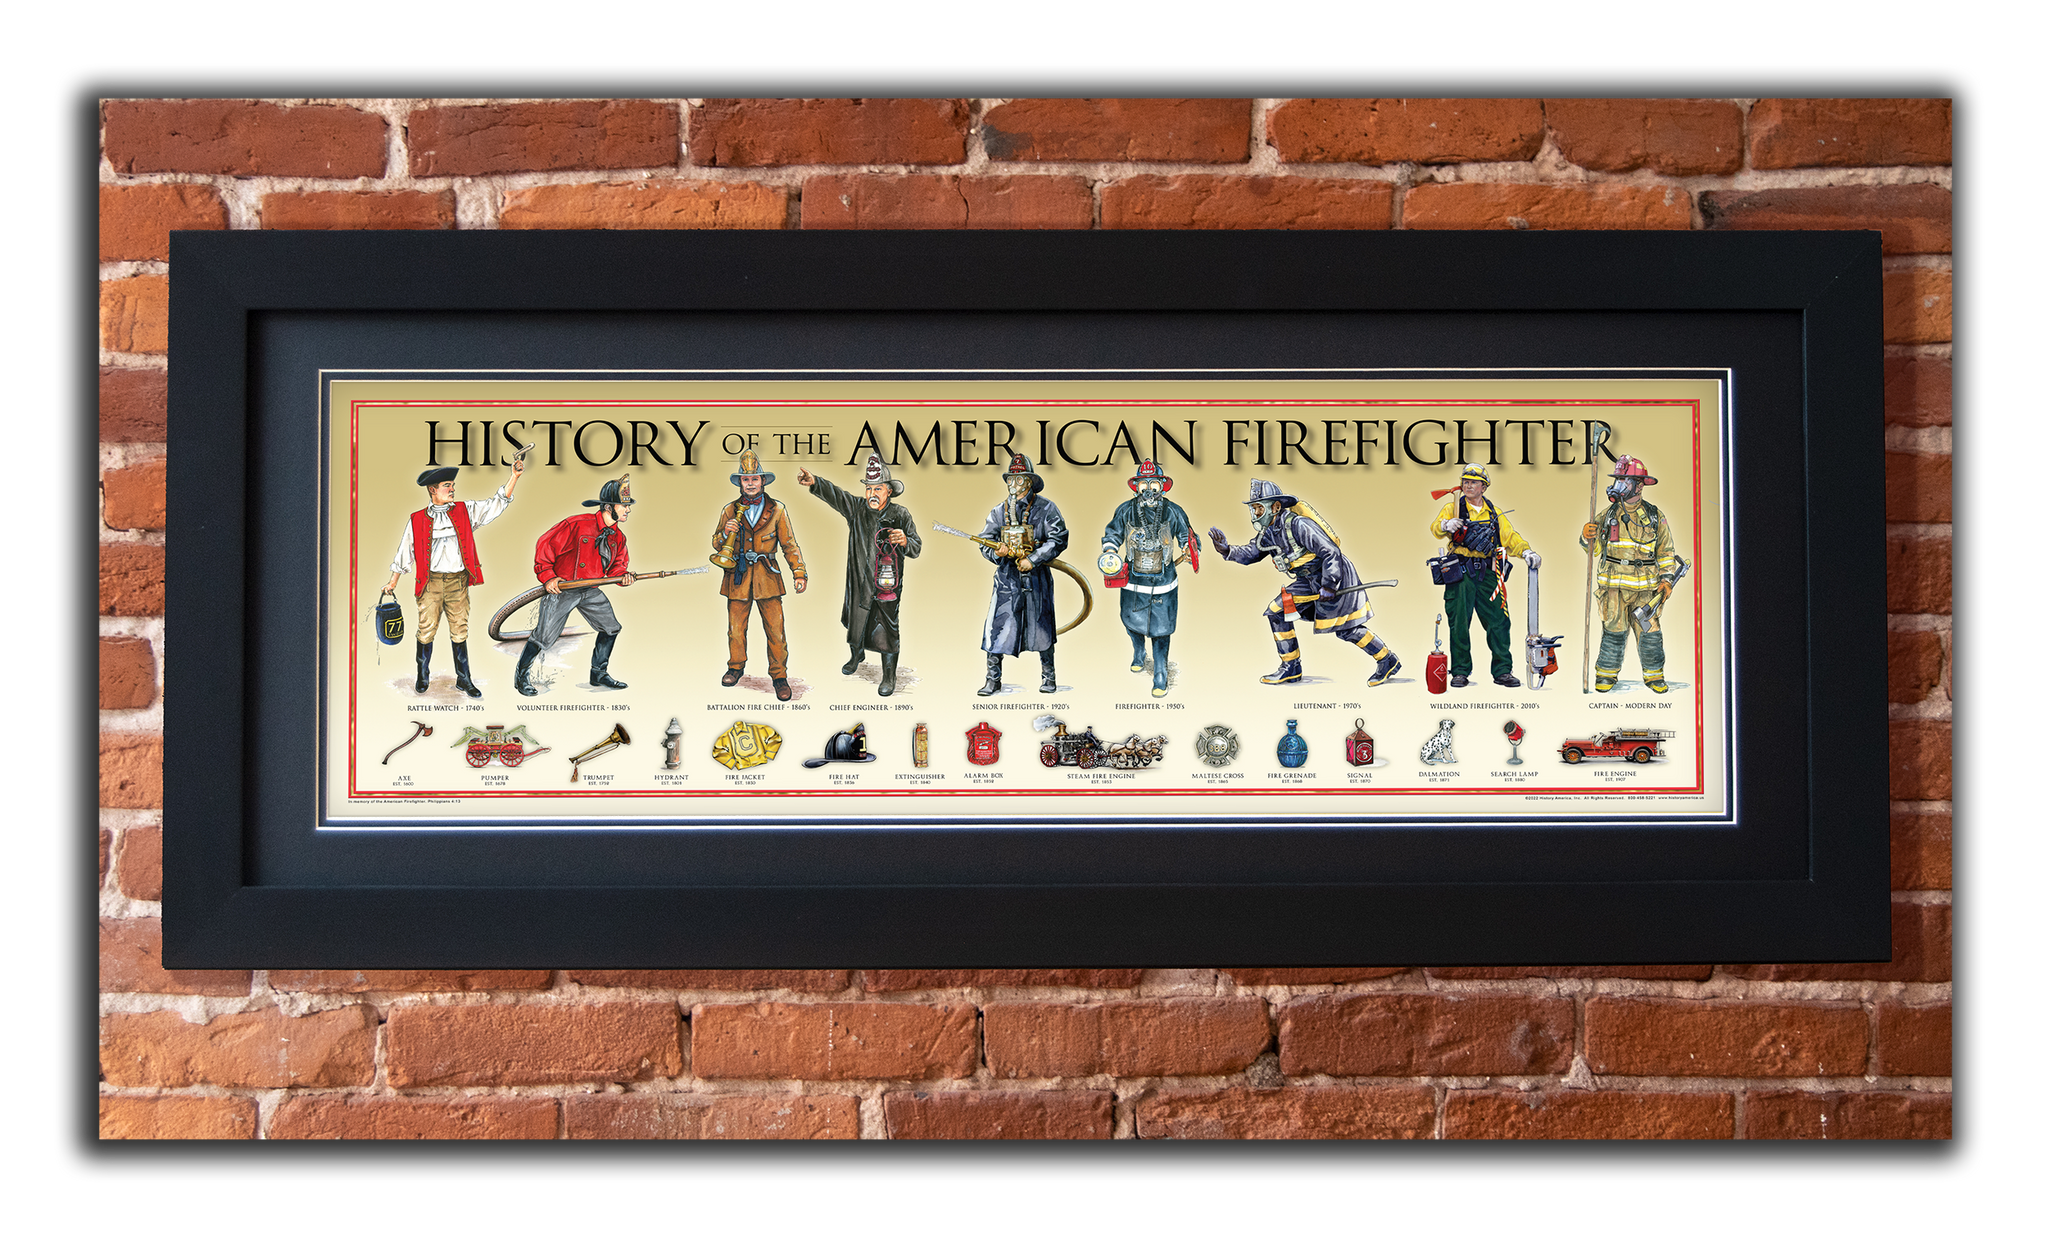 Firefighter - Framed 2” Black Double Matted, Flat Molding 11 ¾" x 36”